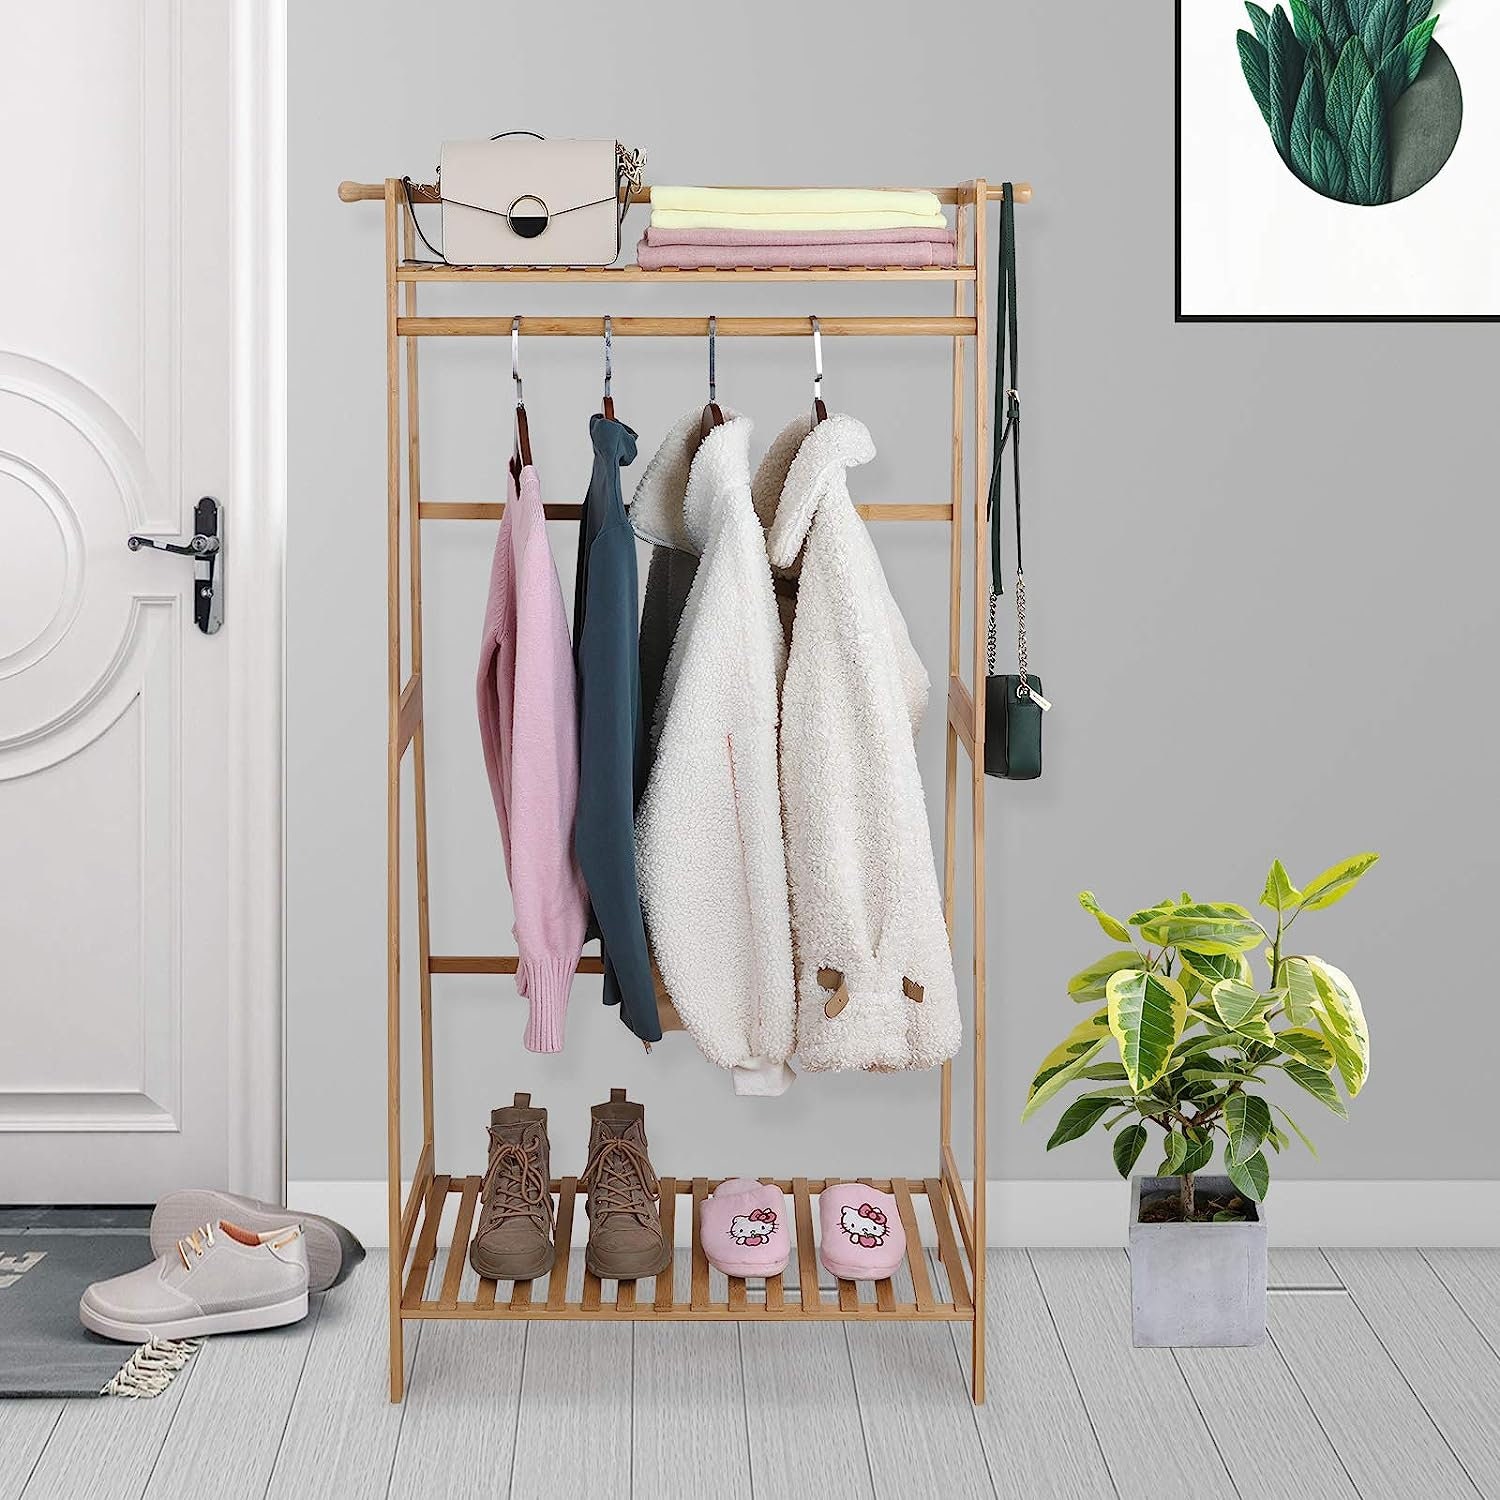  Jotsport Bamboo Clothes Rack with 7 Tier Storage